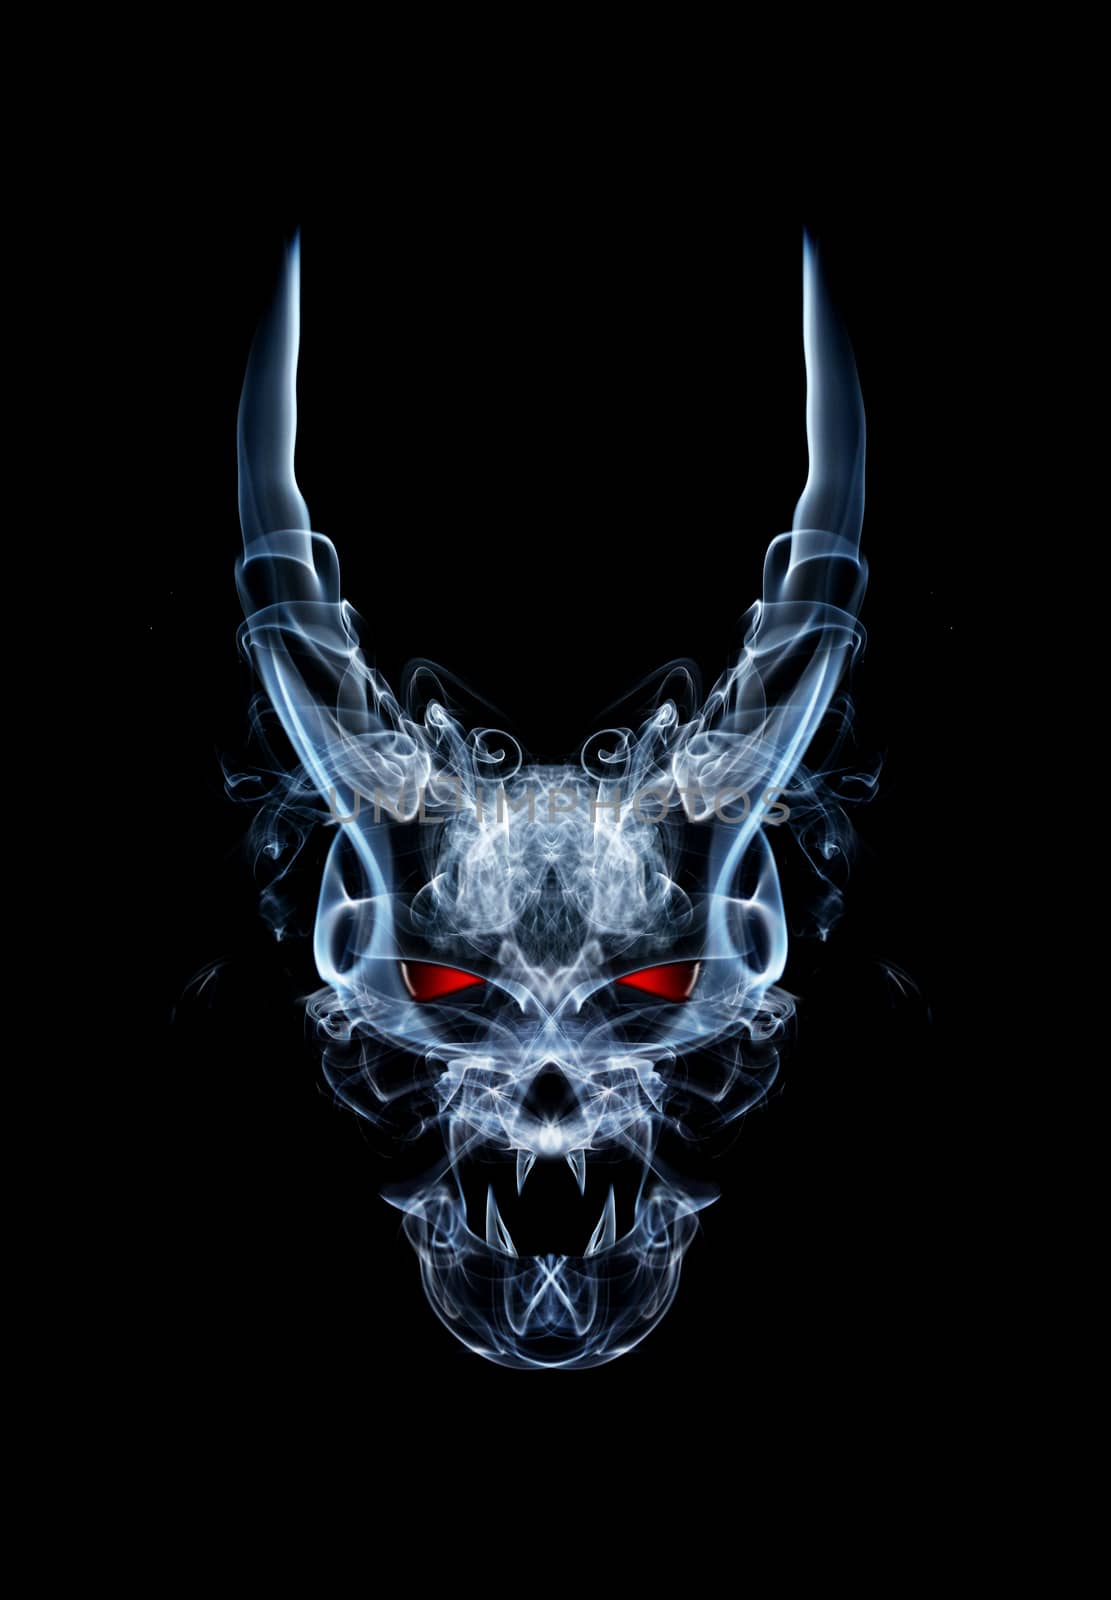 abstract daemon or devil skull , made from smoke